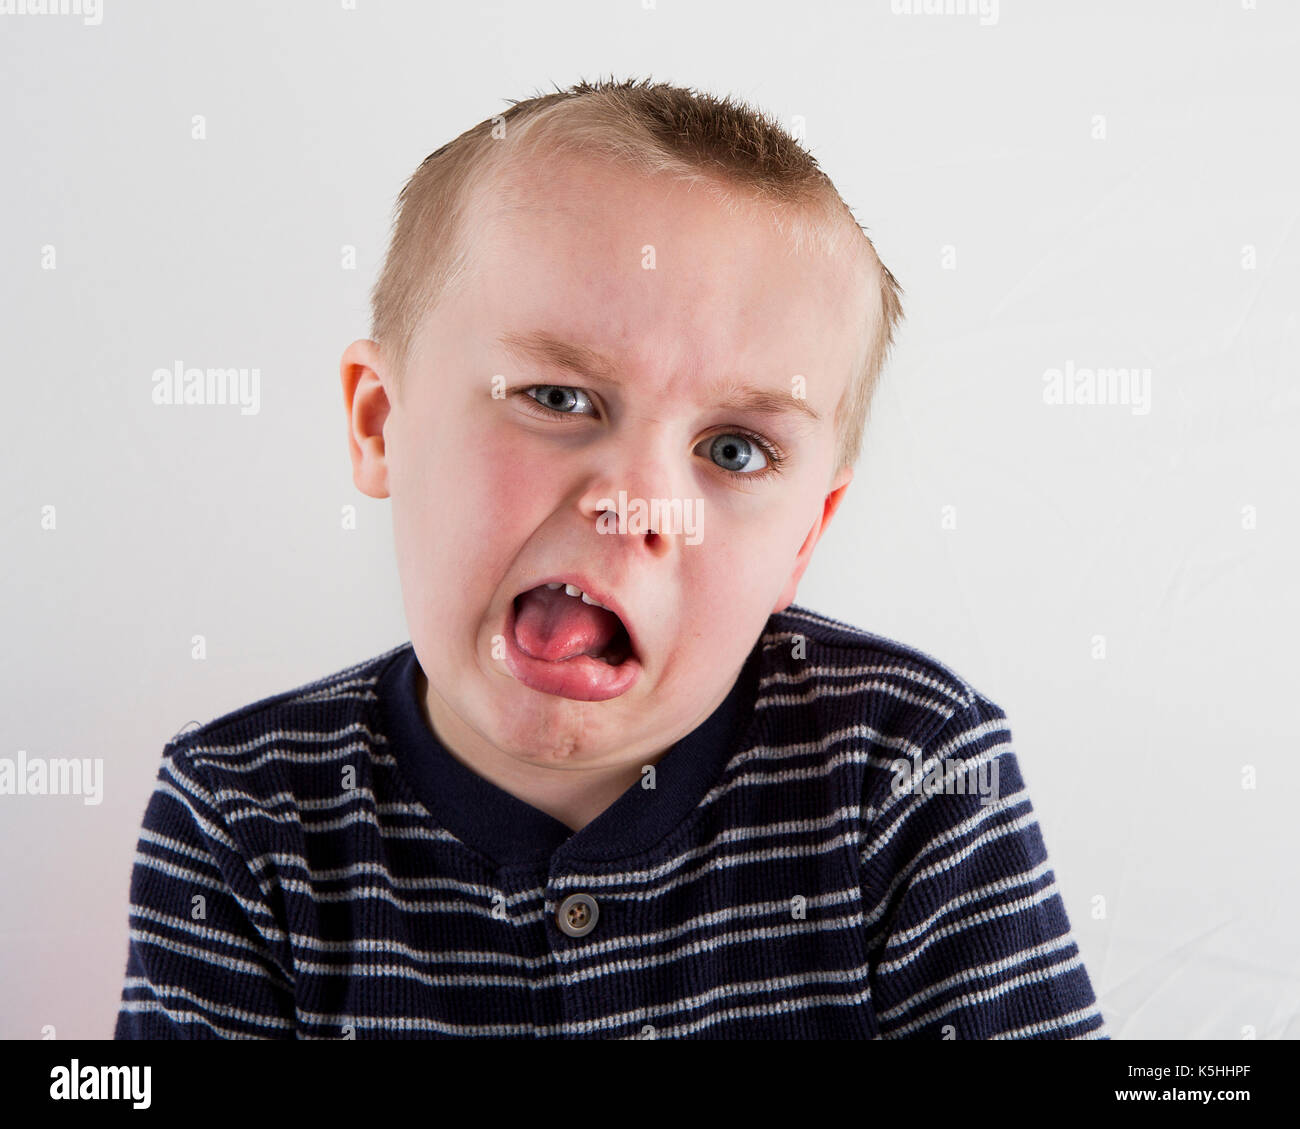 Young boy looking at the camera having a fun time making faces Stock Photo